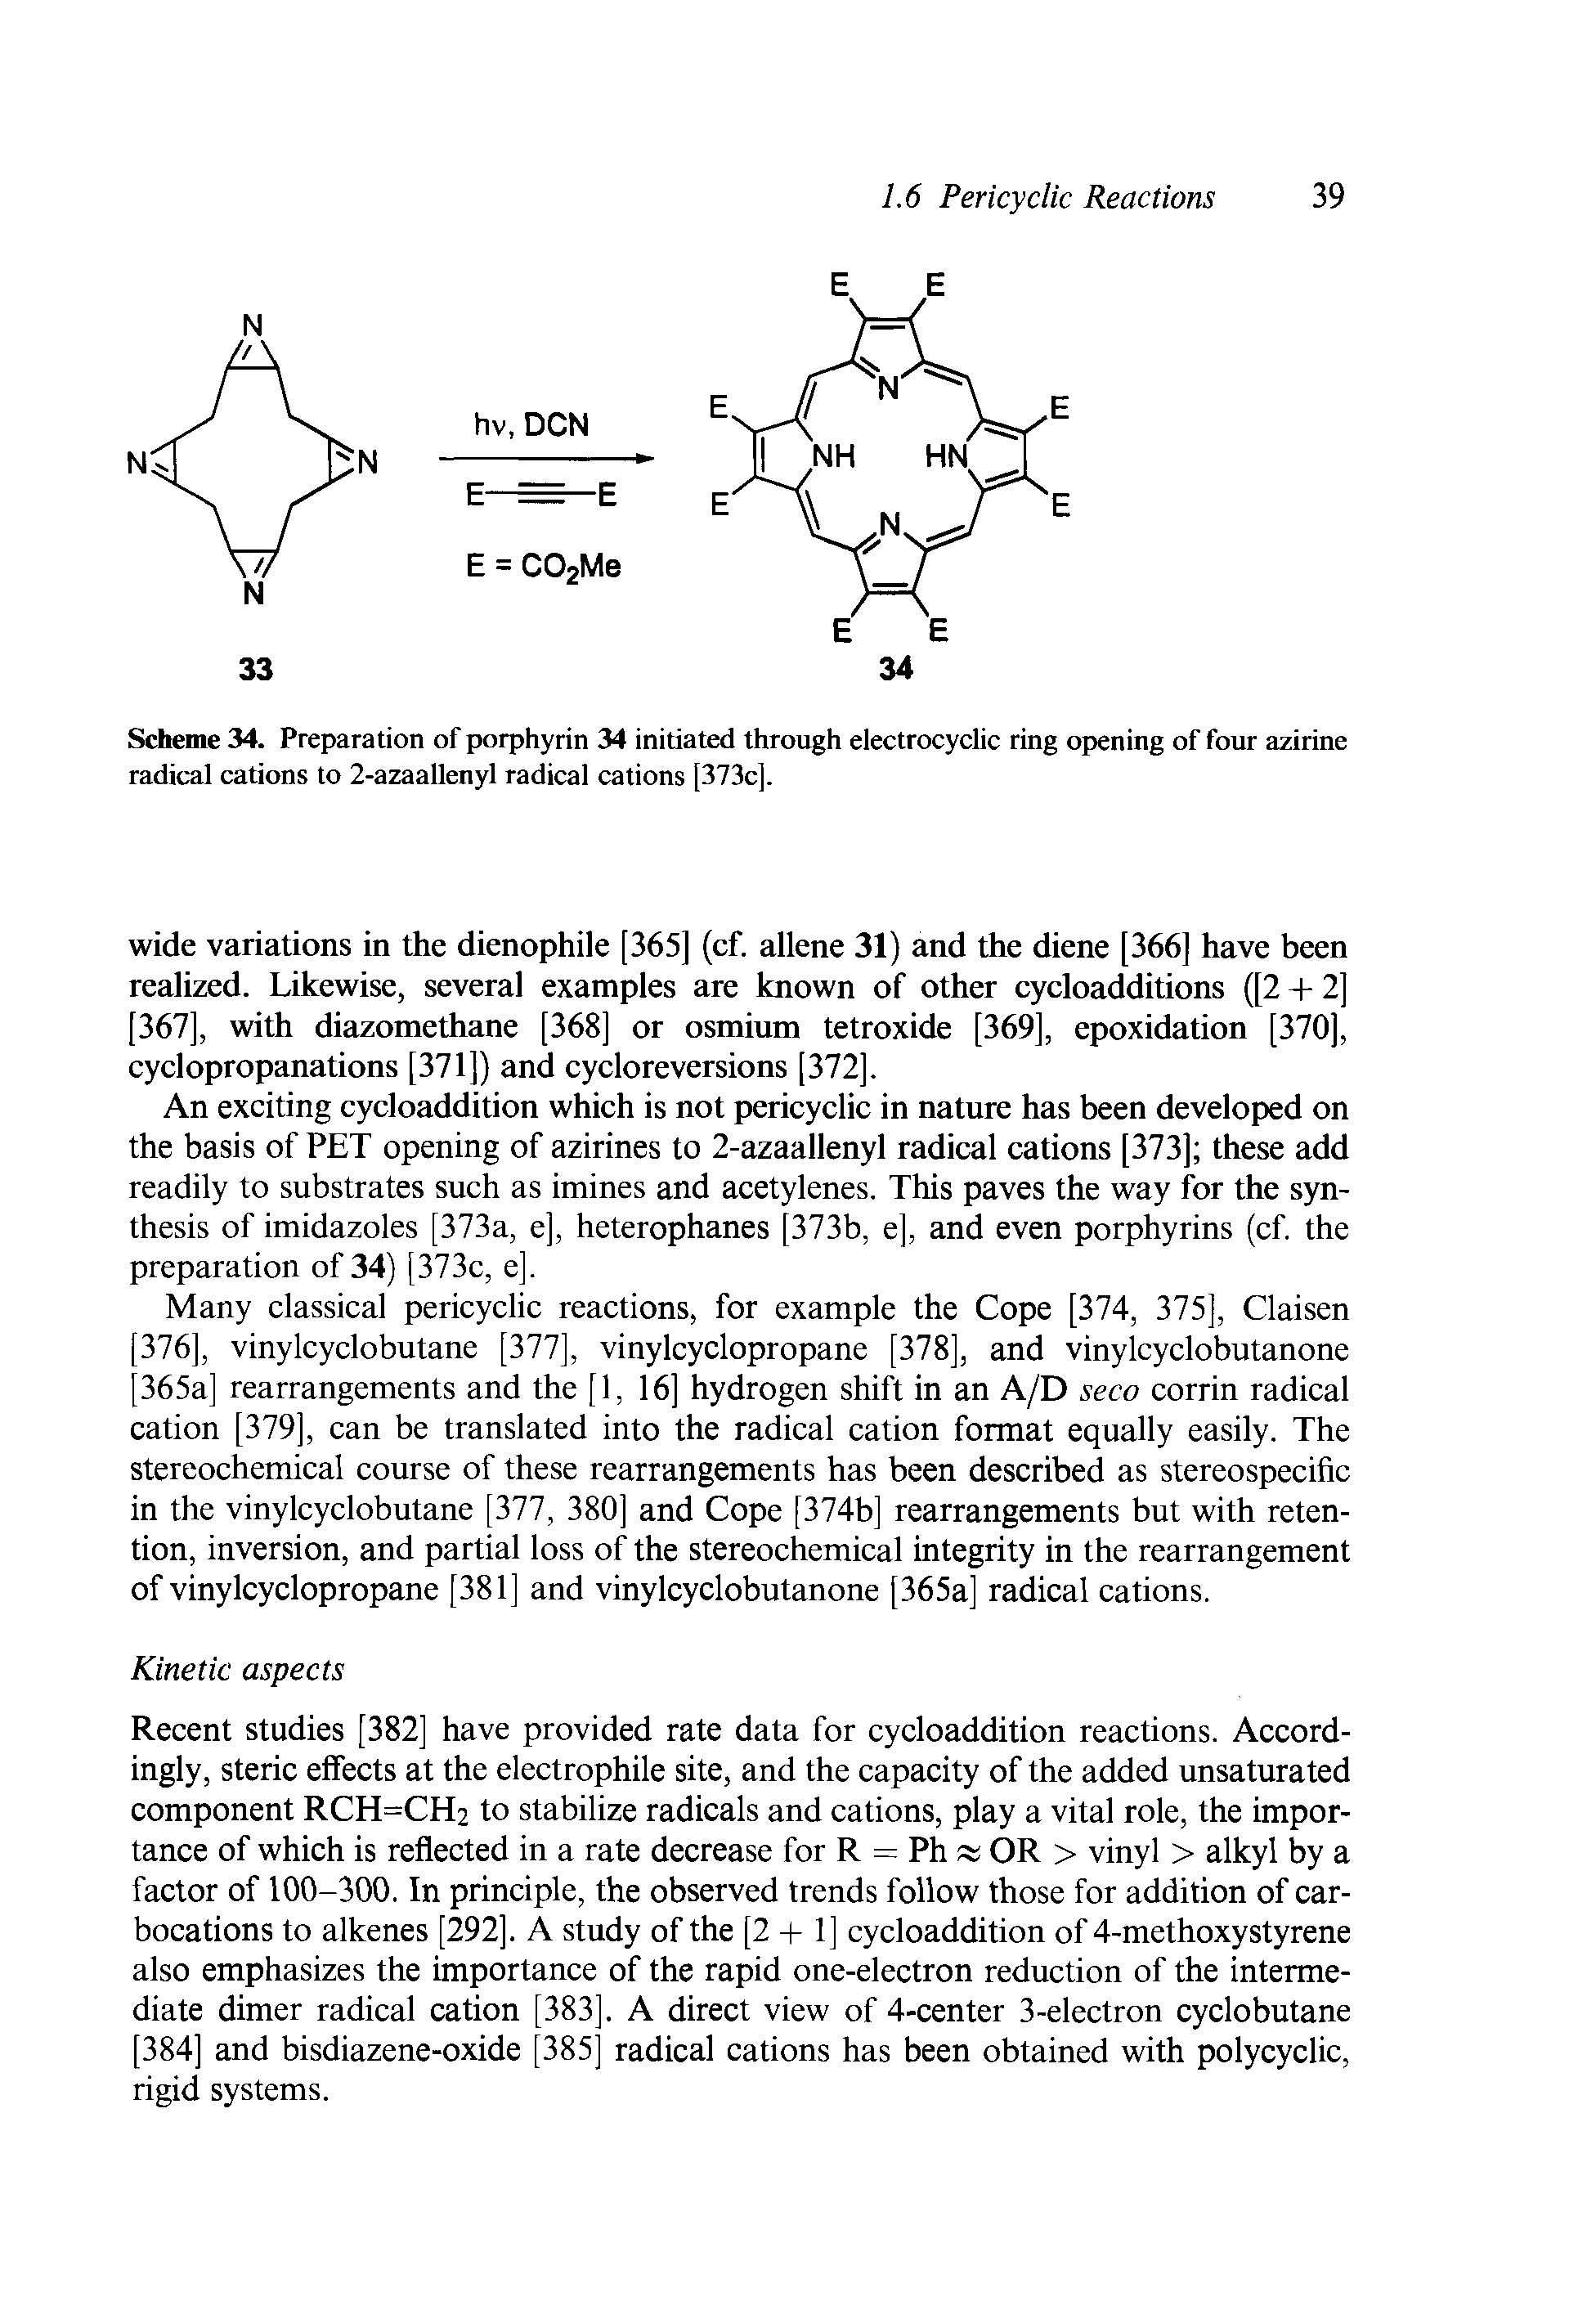 Scheme 34. Preparation of porphyrin 34 initiated through electrocyclic ring opening of four azirine radical cations to 2-azaallenyl radical cations [373c].